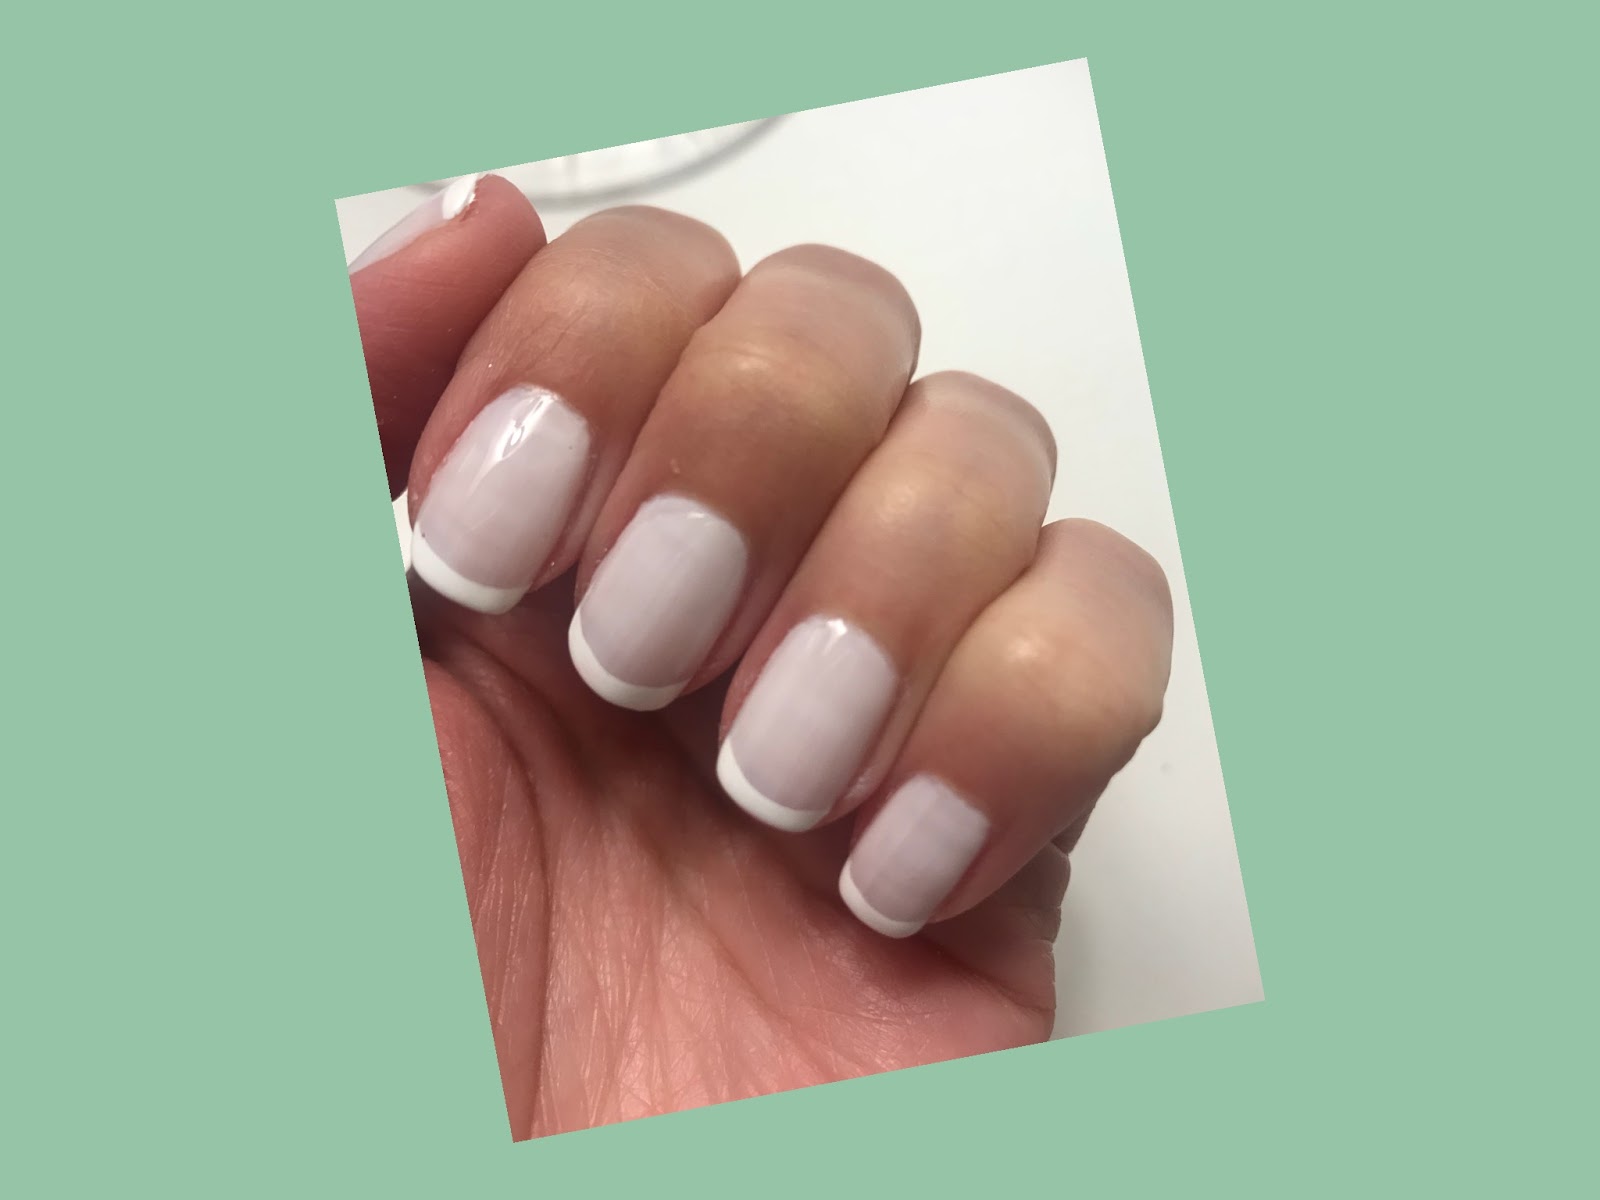 8. "Nail Art with a Twist: Adding Barn Wood Gray Polish to Your French Manicure" - wide 1